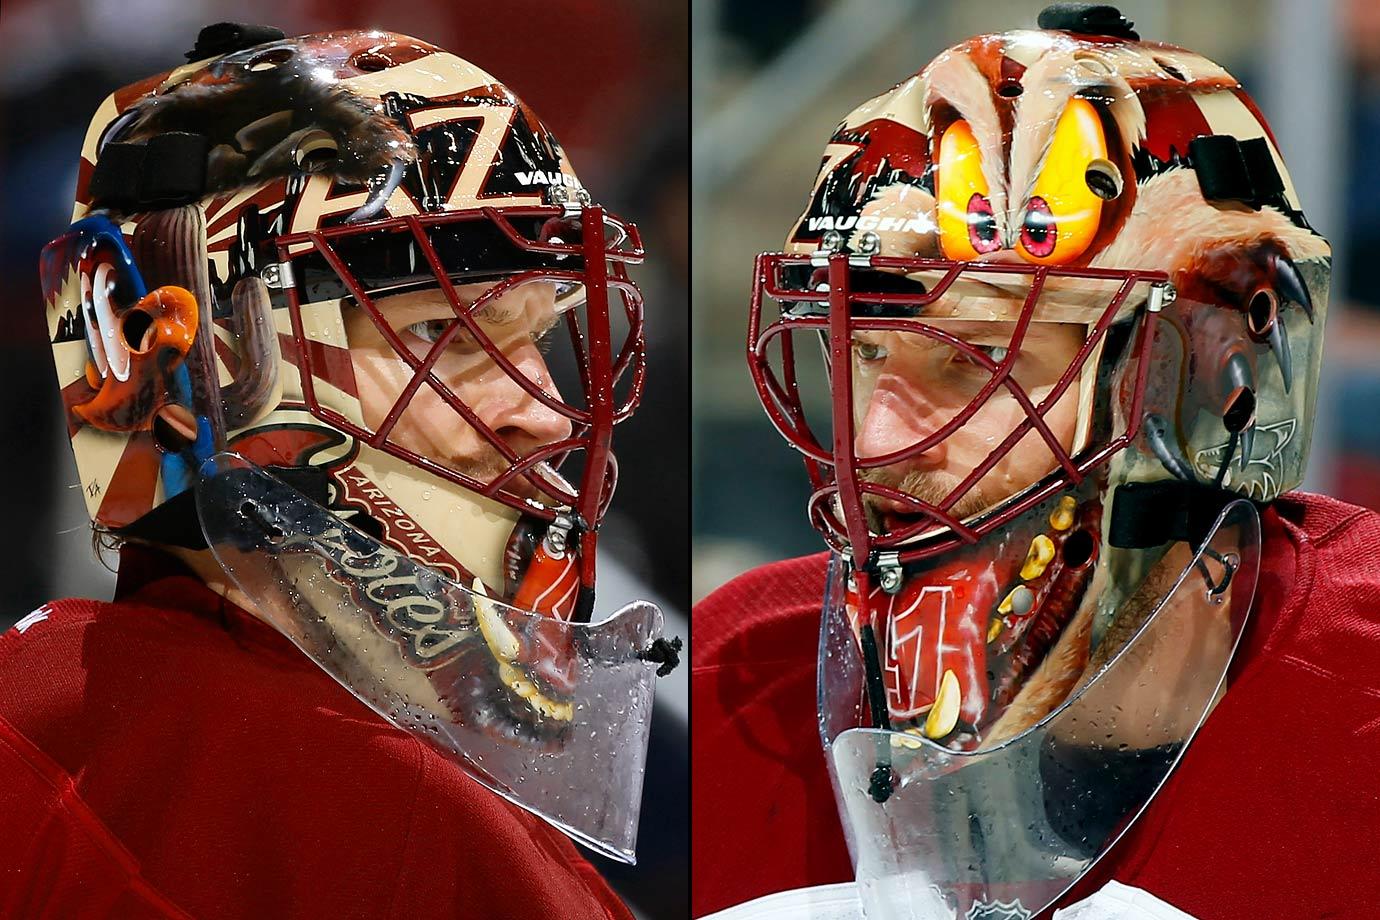 Oct 11, 2014: Arizona Coyotes goalie Mike Smith (41) during the